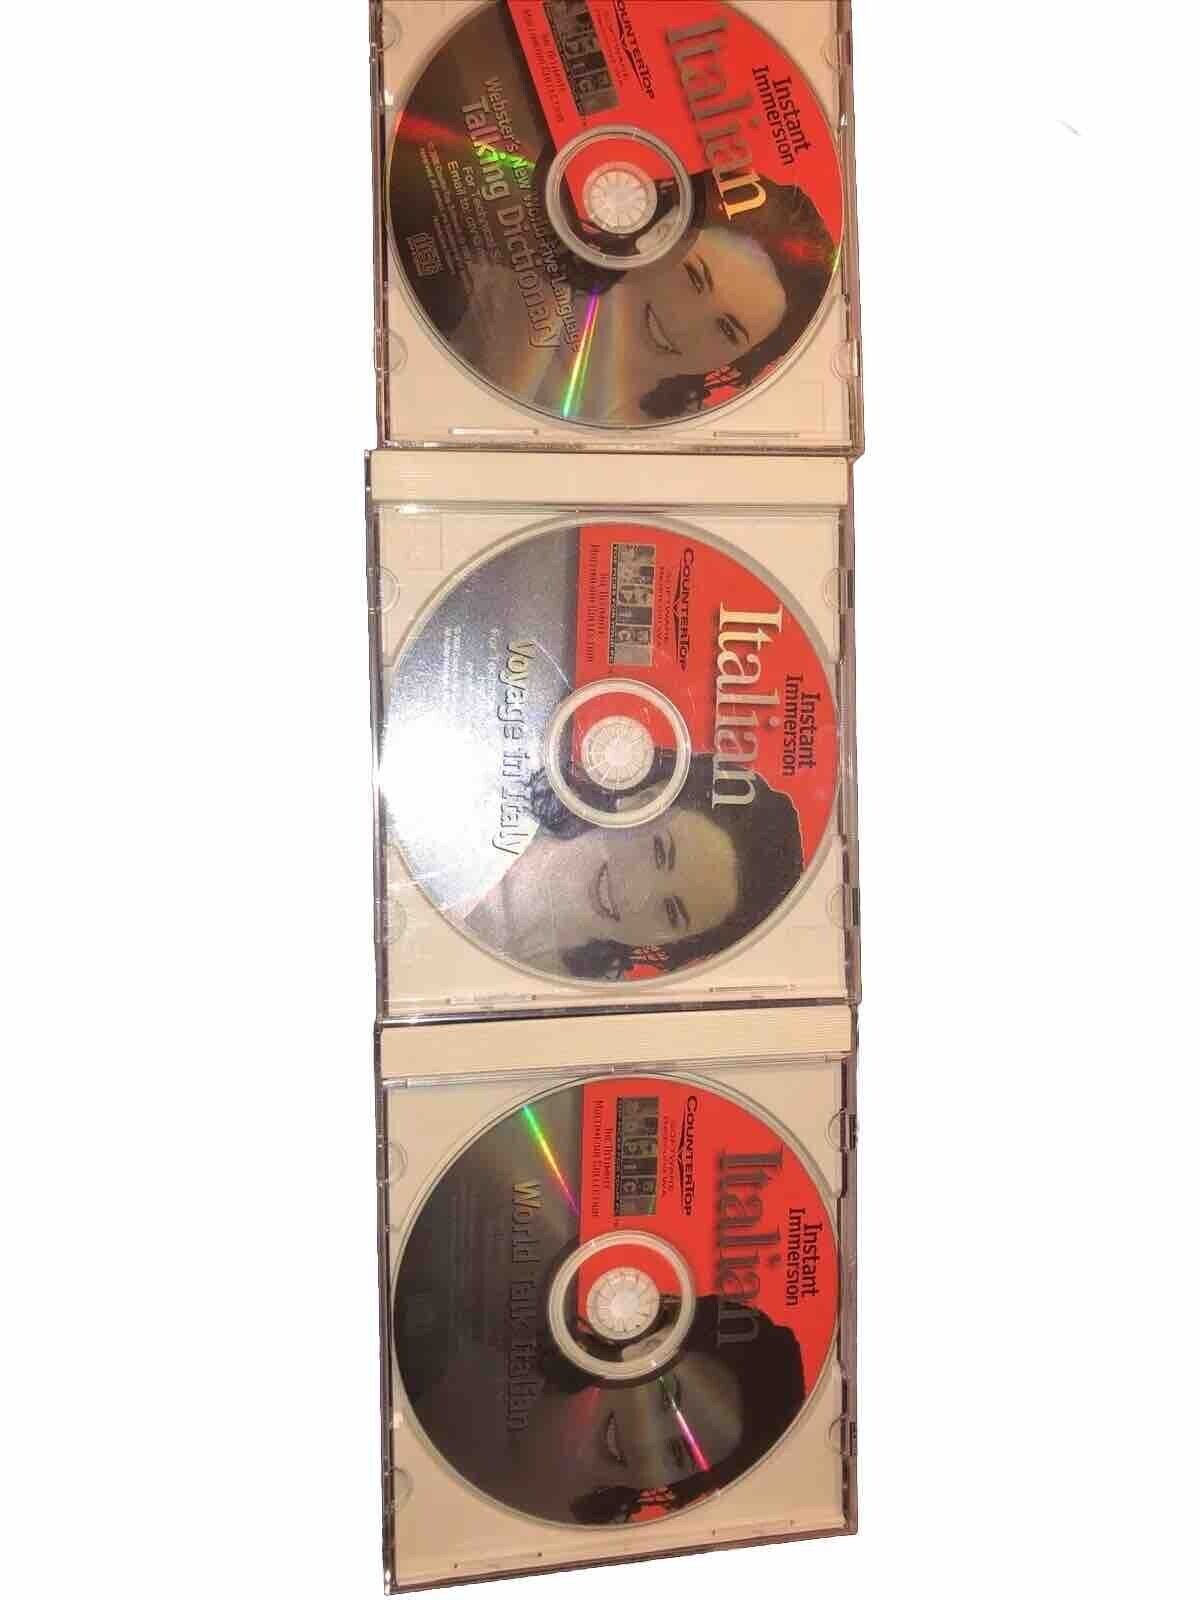 Instant Immersion Italian 3 Disc CD Group for Windows Copyright 2000